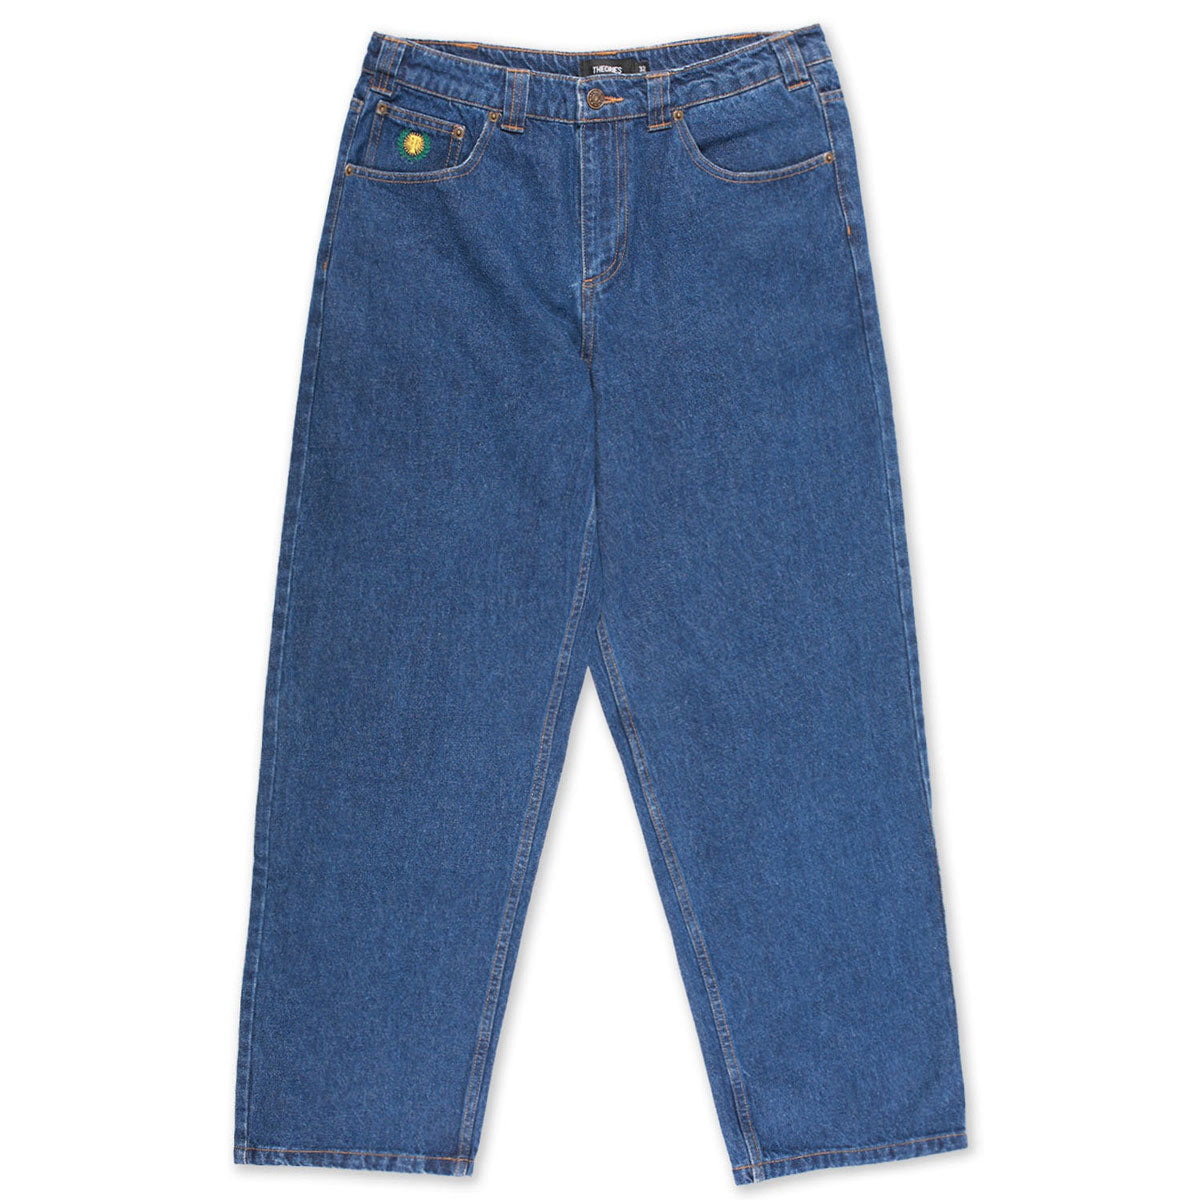 Theories Plaza Jeans - Washed Blue image 1